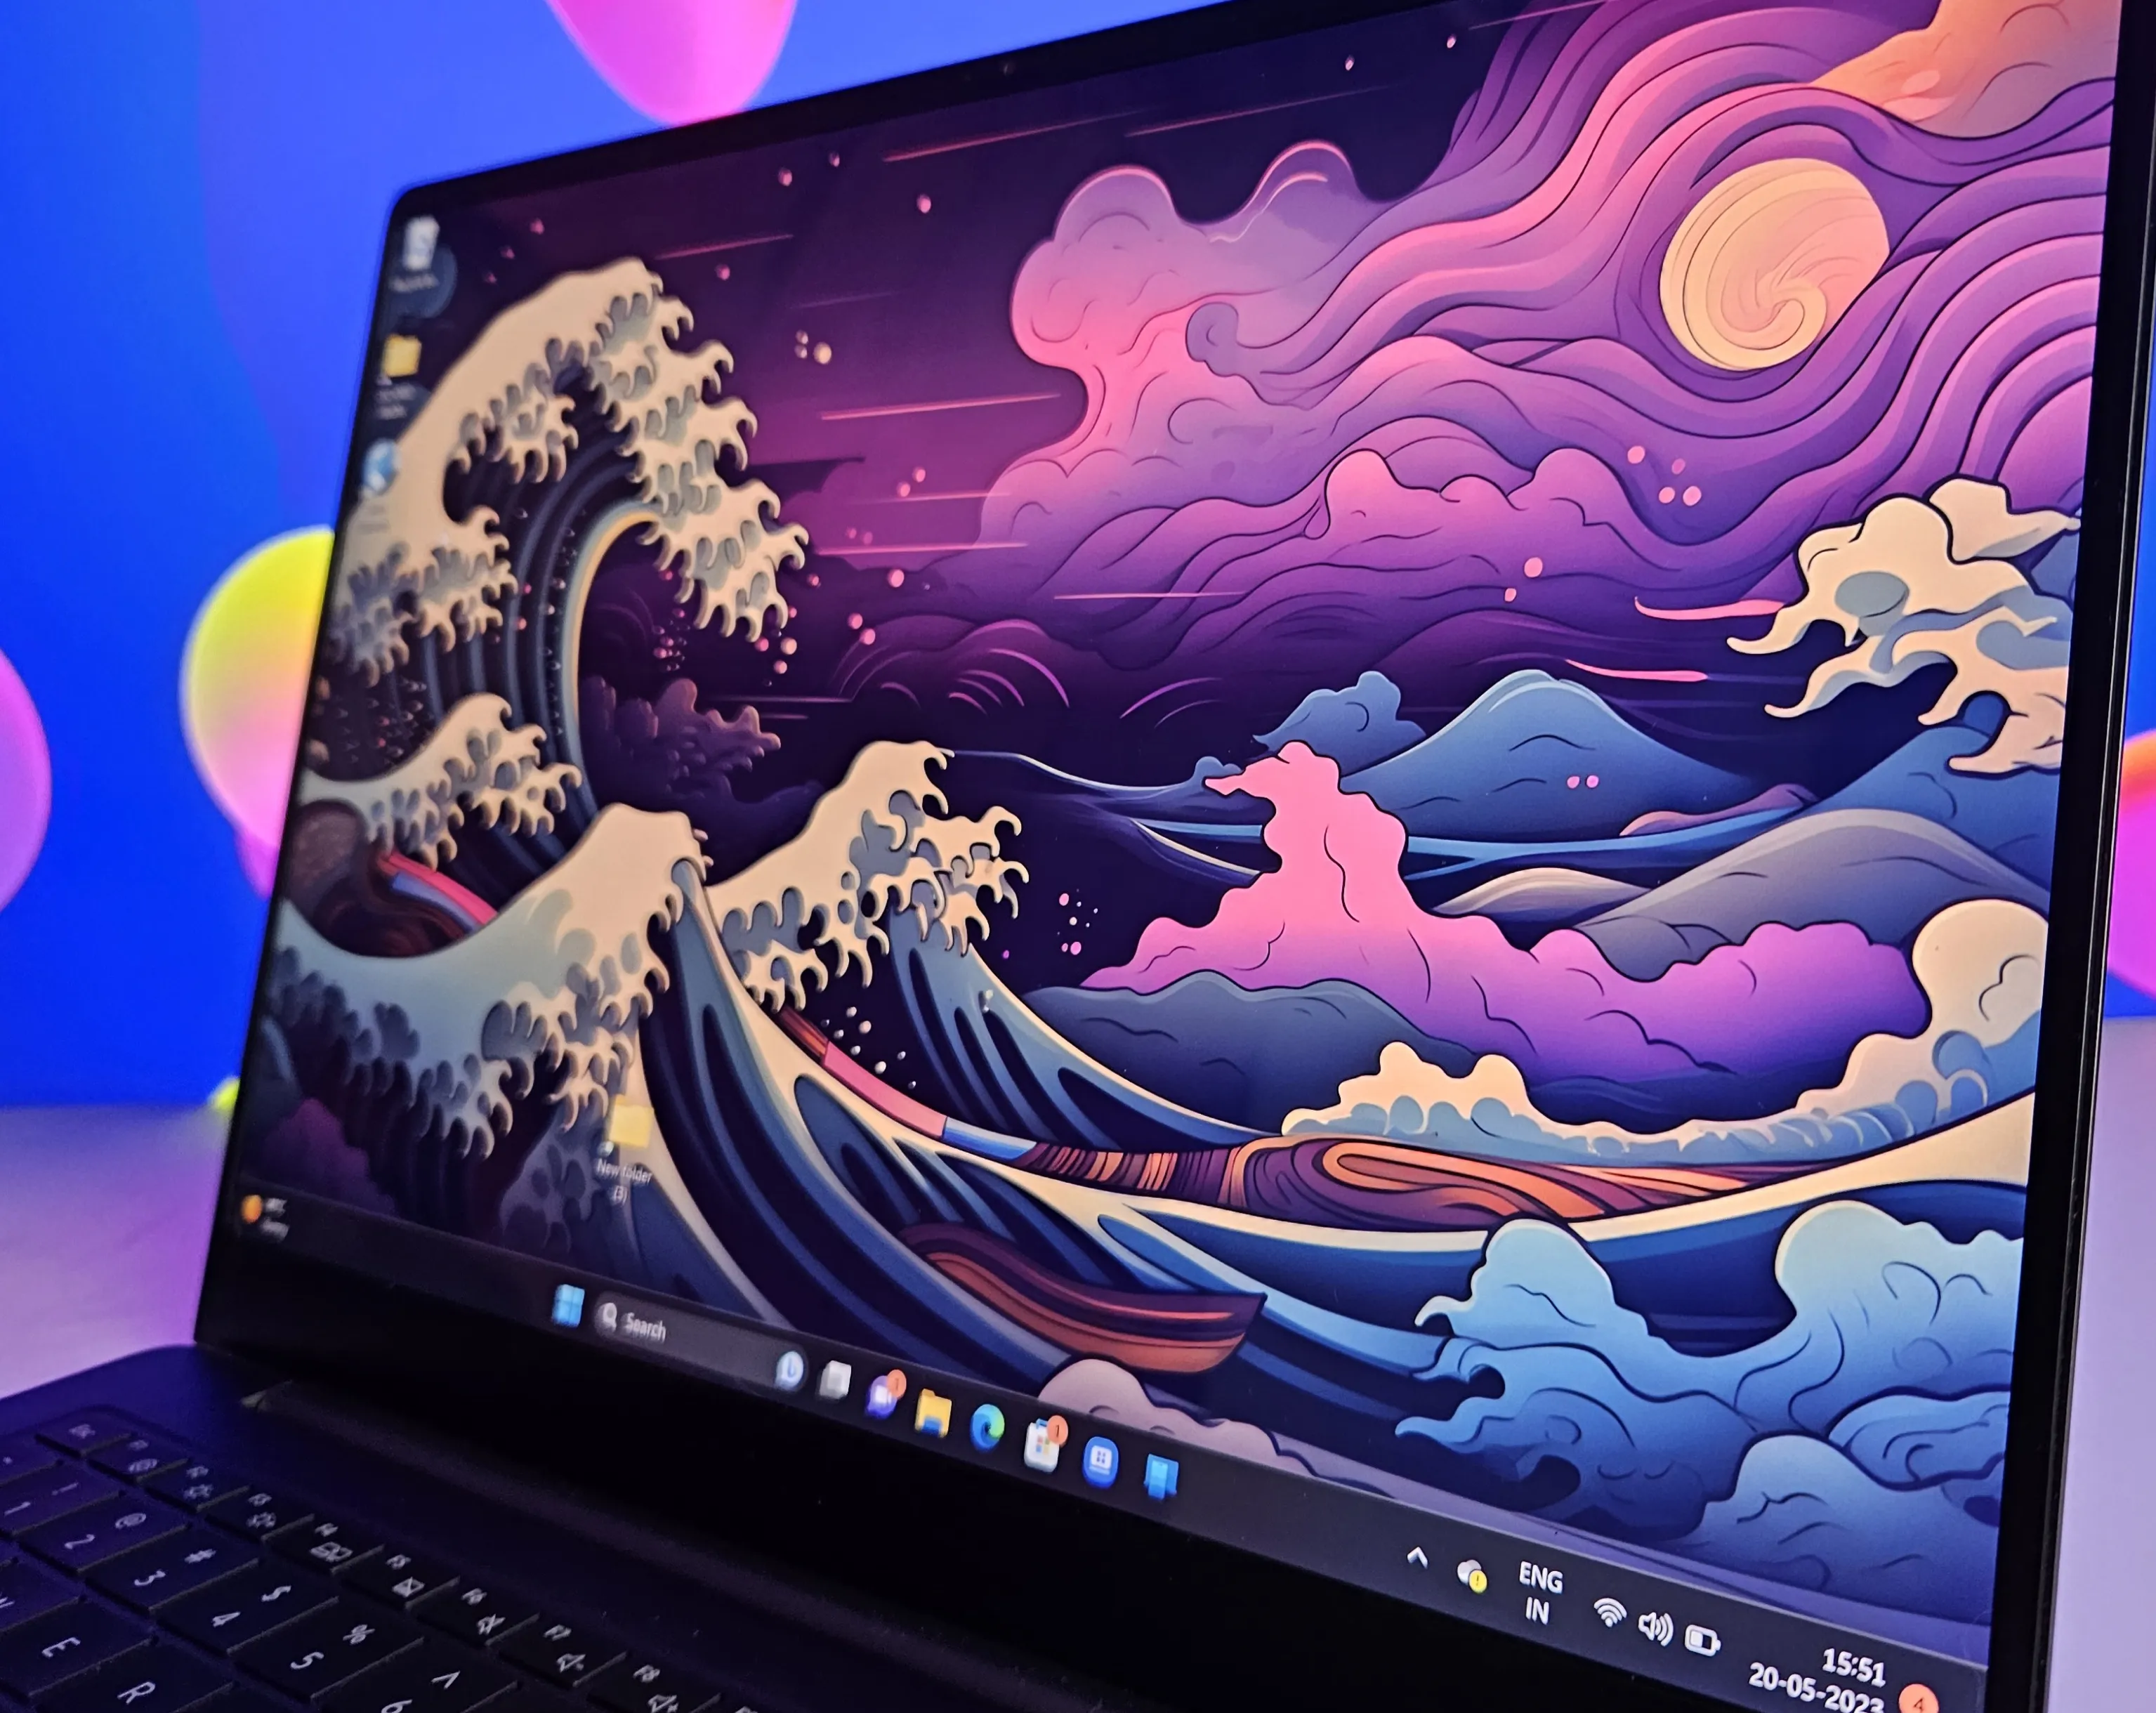 The Galaxy Book 3 Pro gets a 3K 120Hz AMOLED screen.